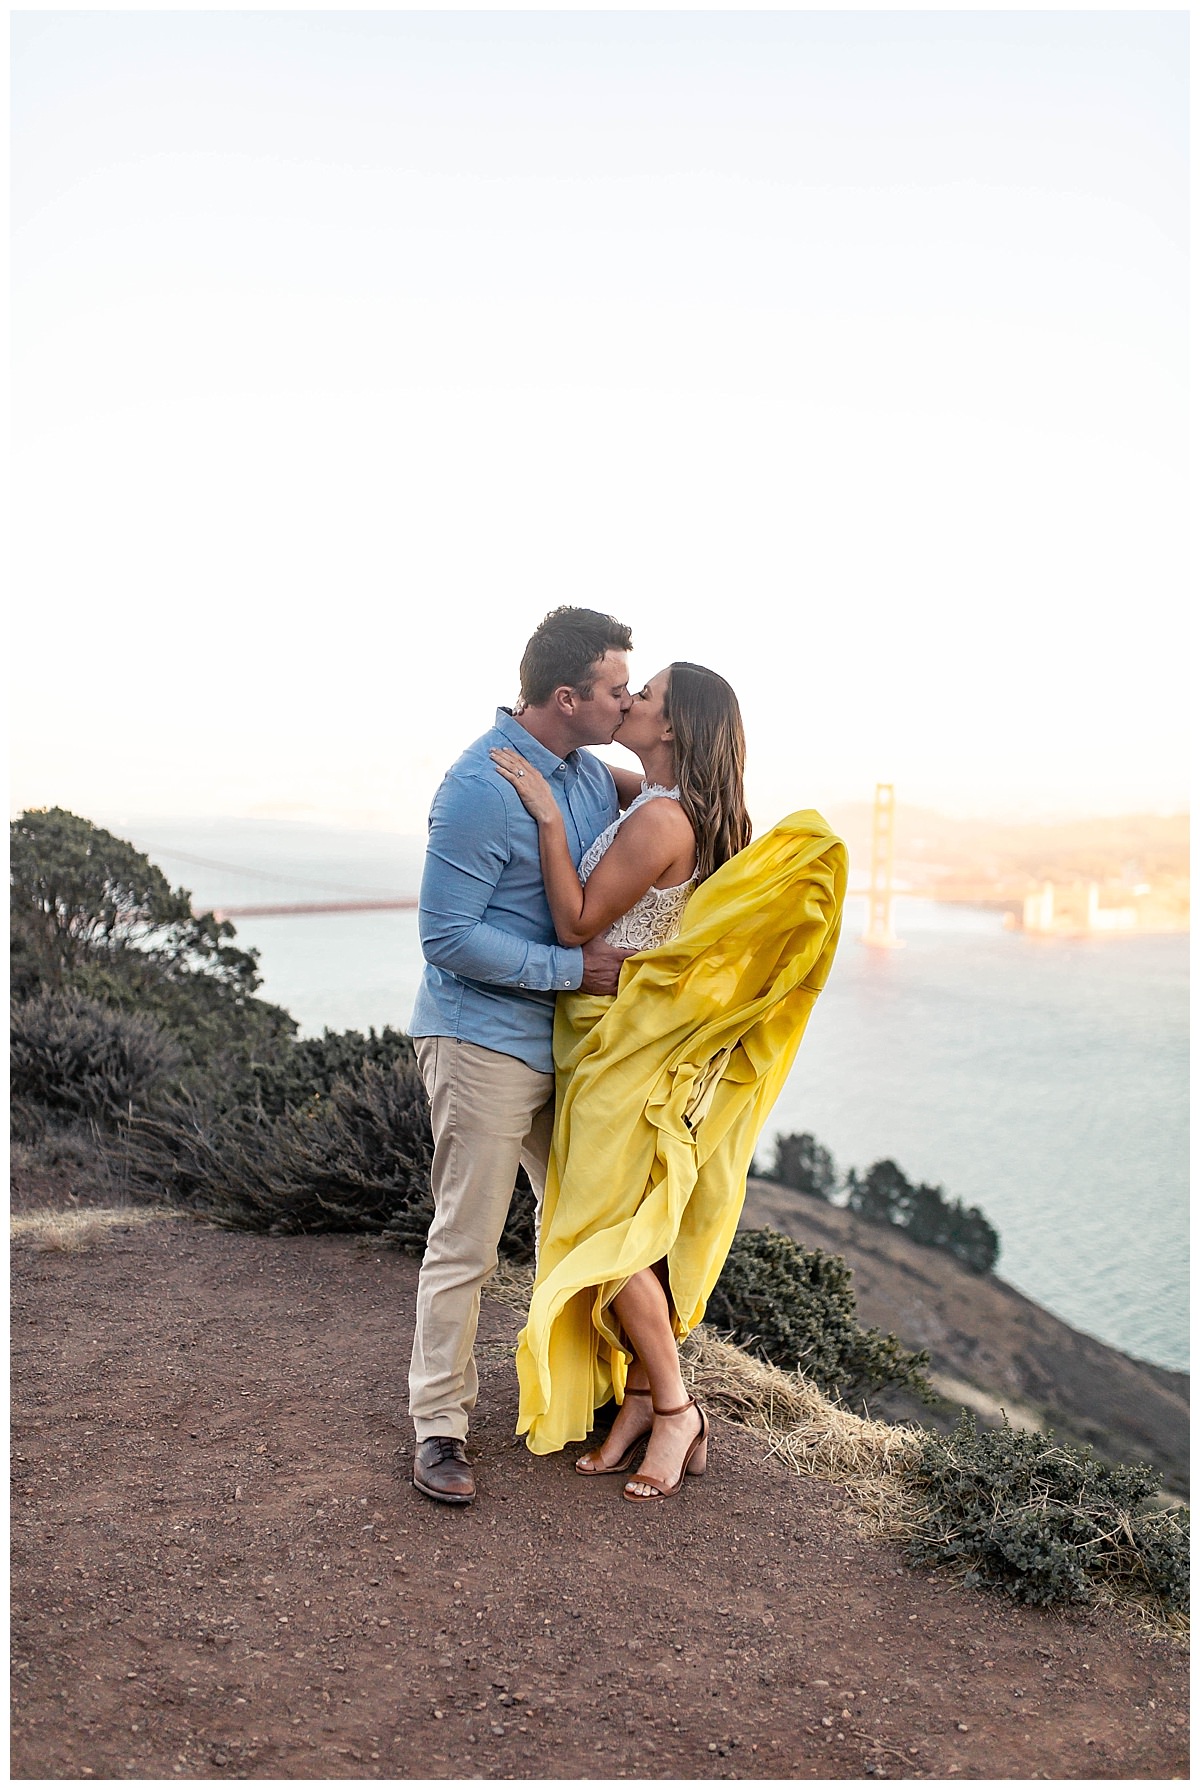 Puppy San Francisco Engagement Photos by @TONIGPHOTO - Toni G Photo in San Fran, CA #tonigphoto #puppyengagement #sanfranengagement #goldengatebridge #sunsetengagementphotos (TONI G PHOTO)